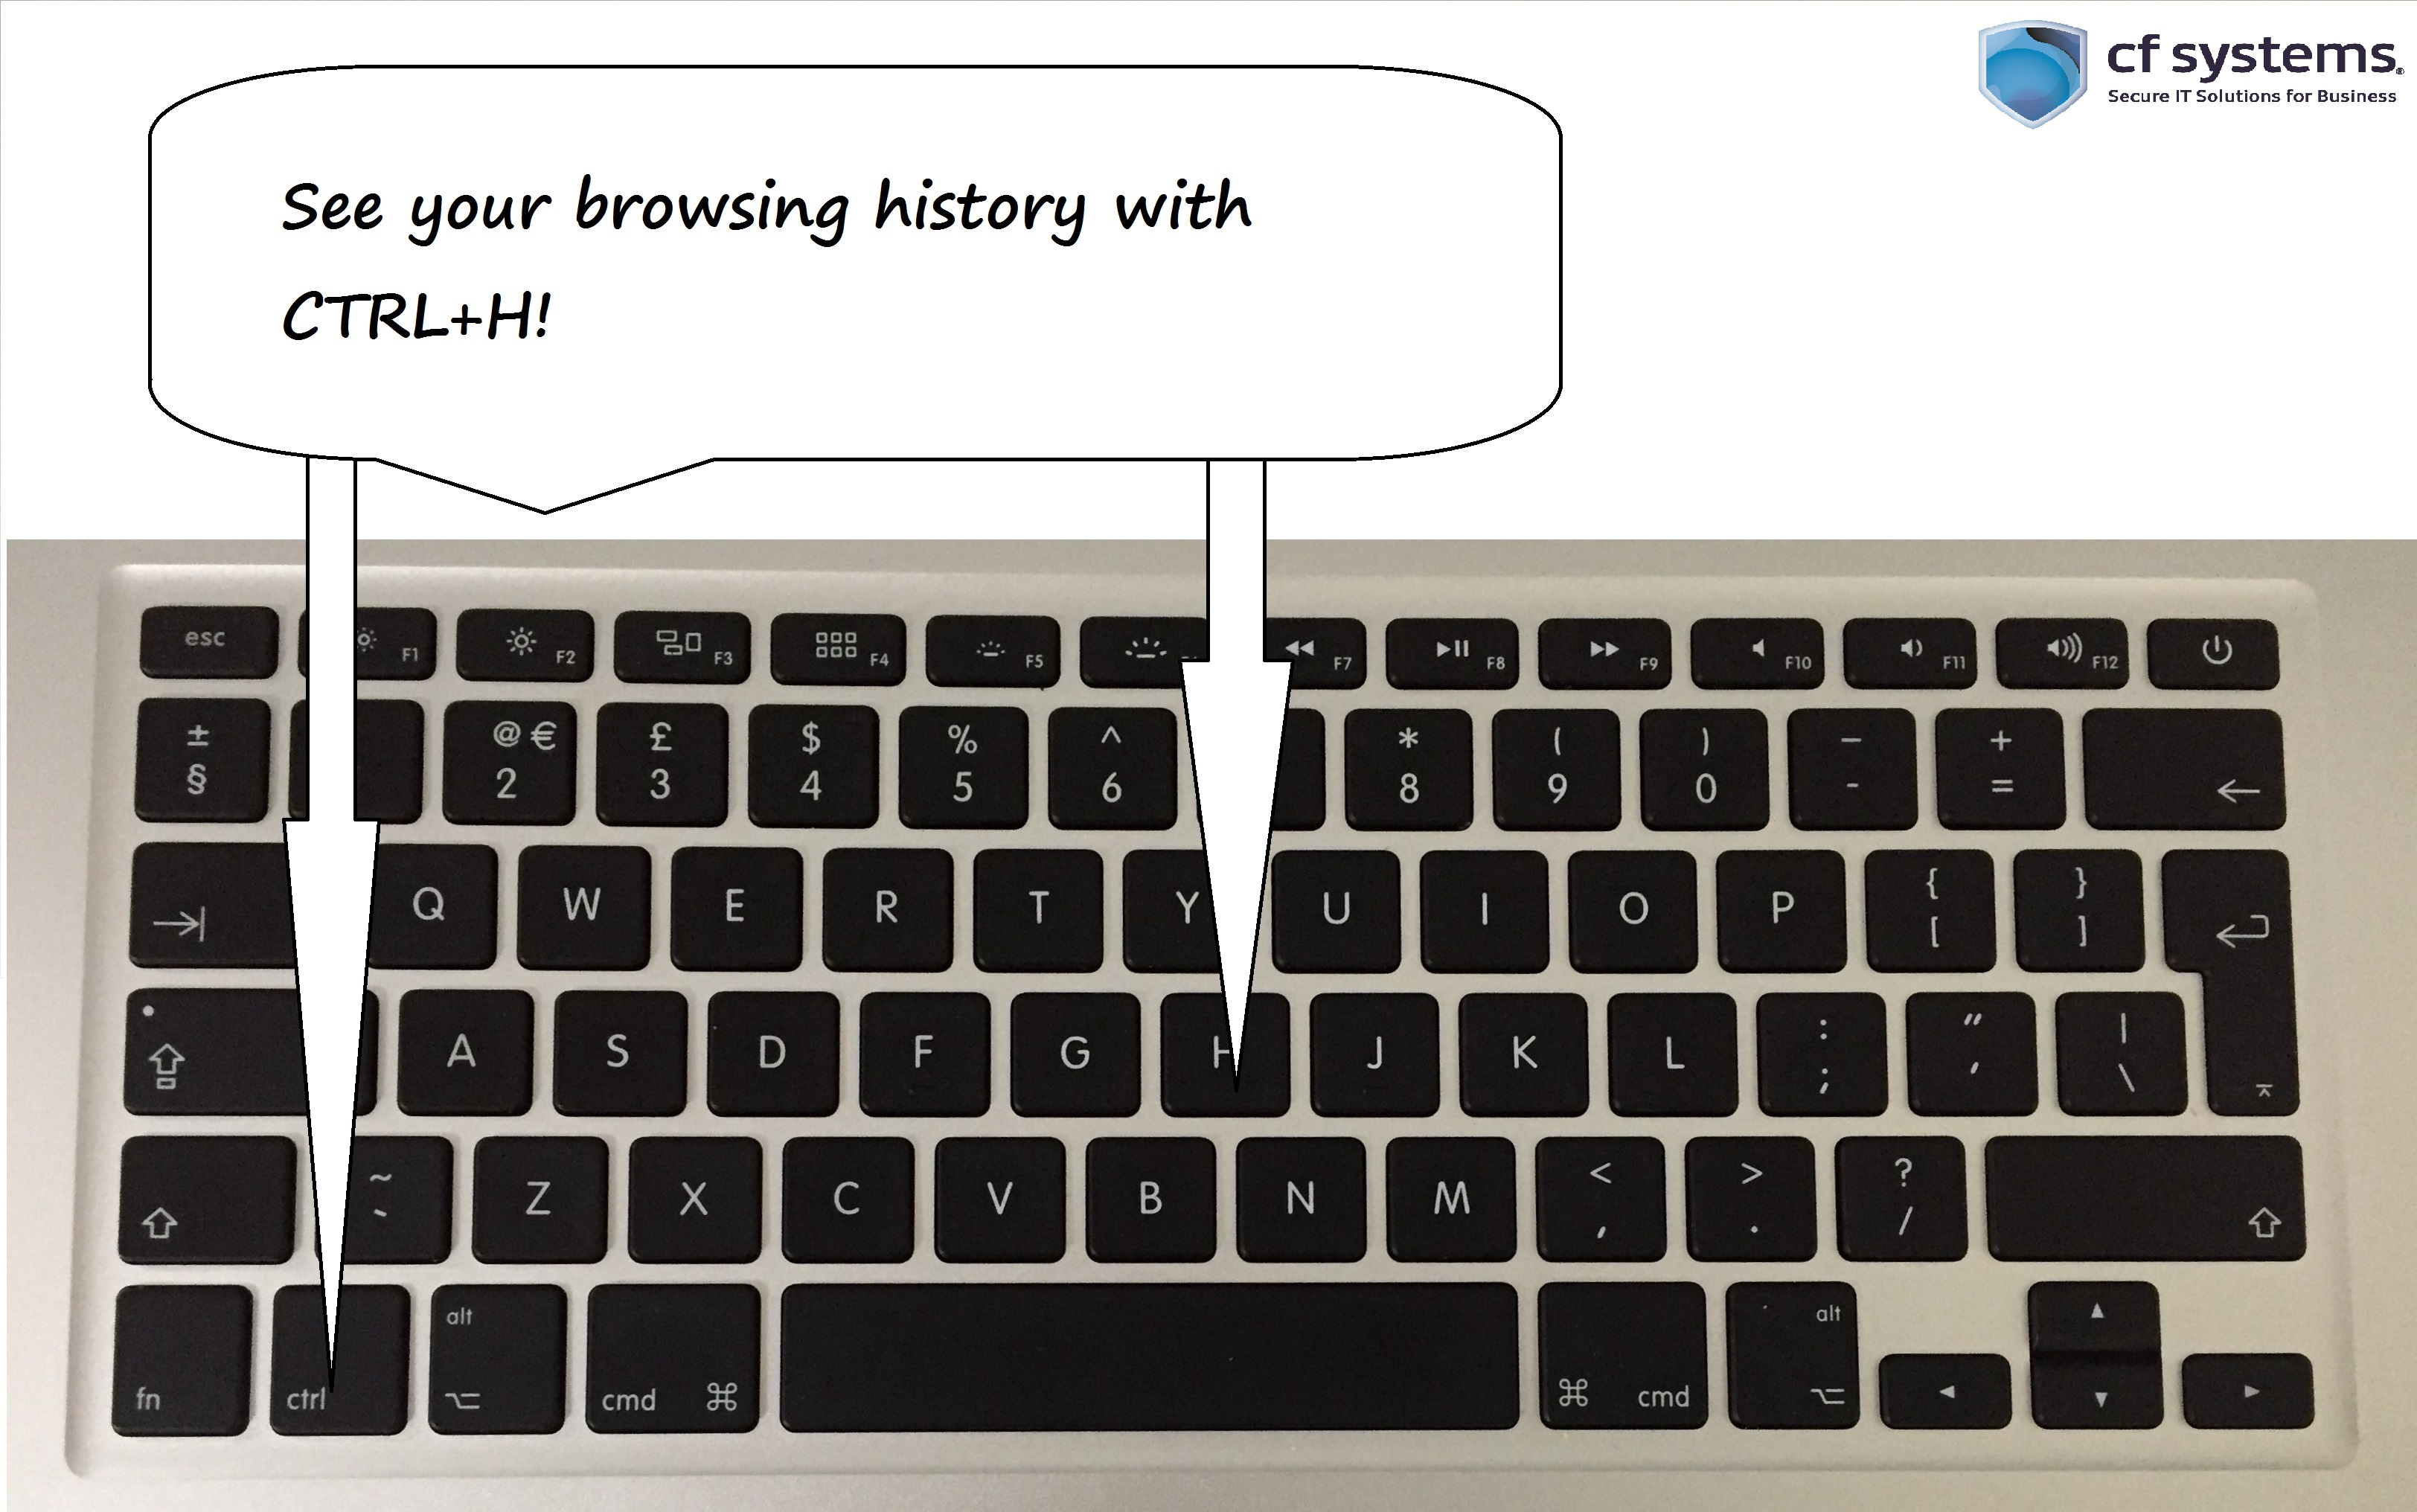 Quickly visualise your browsing history by only using your keyboard!